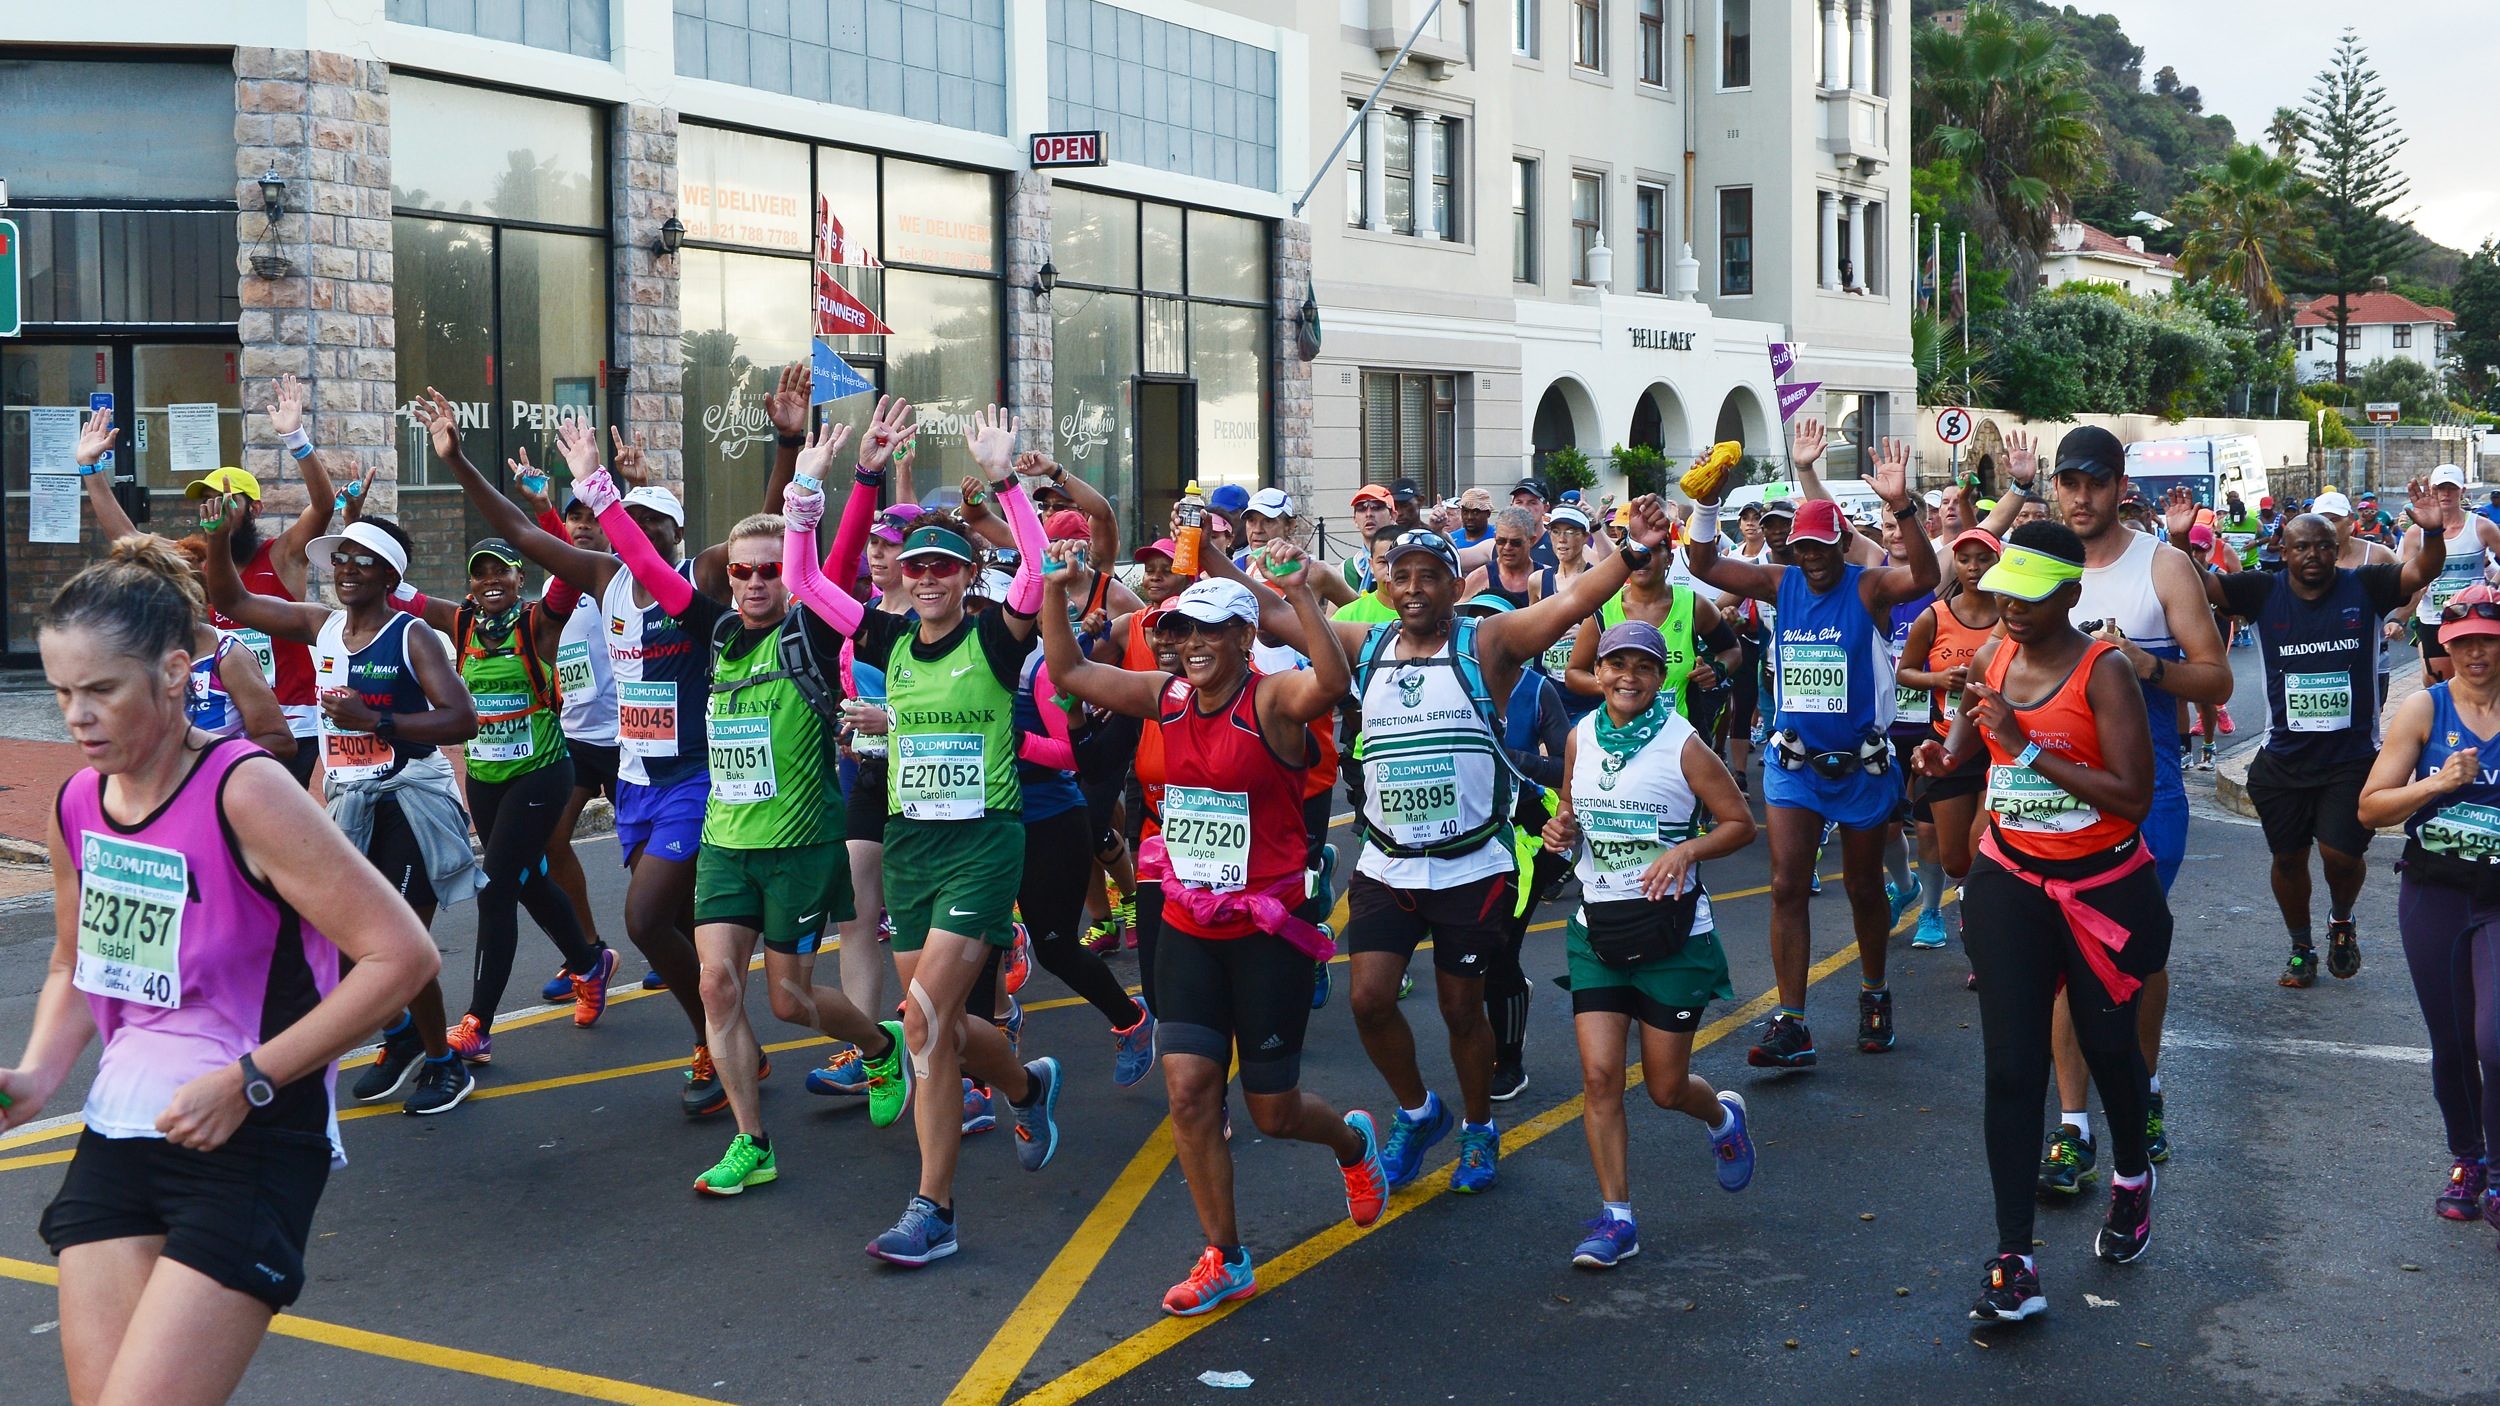 All you need to know about TotalSports Two Oceans road closures